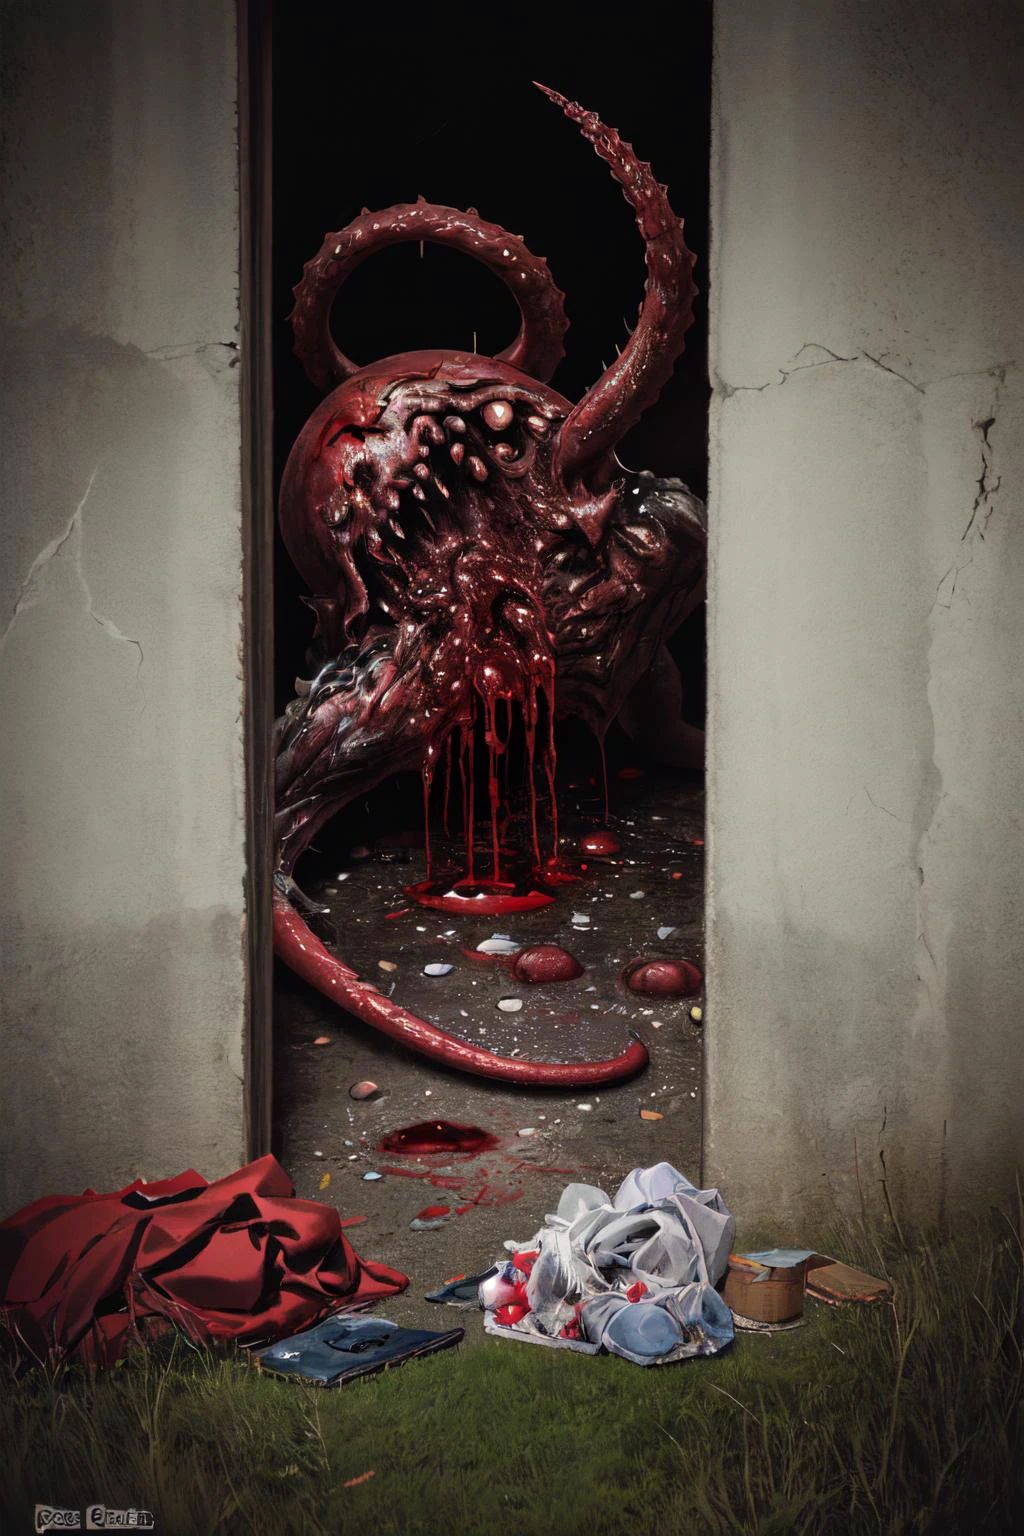 reelhorror,creature, humanoid, dismembered body, spider legs, vertical mouth, drooling, looking at viewer, lying, pants, bag, blood, tentacles, monster, injury, blood, realistic, death, corpse, messy, outdoors, pov scene, pov, horror